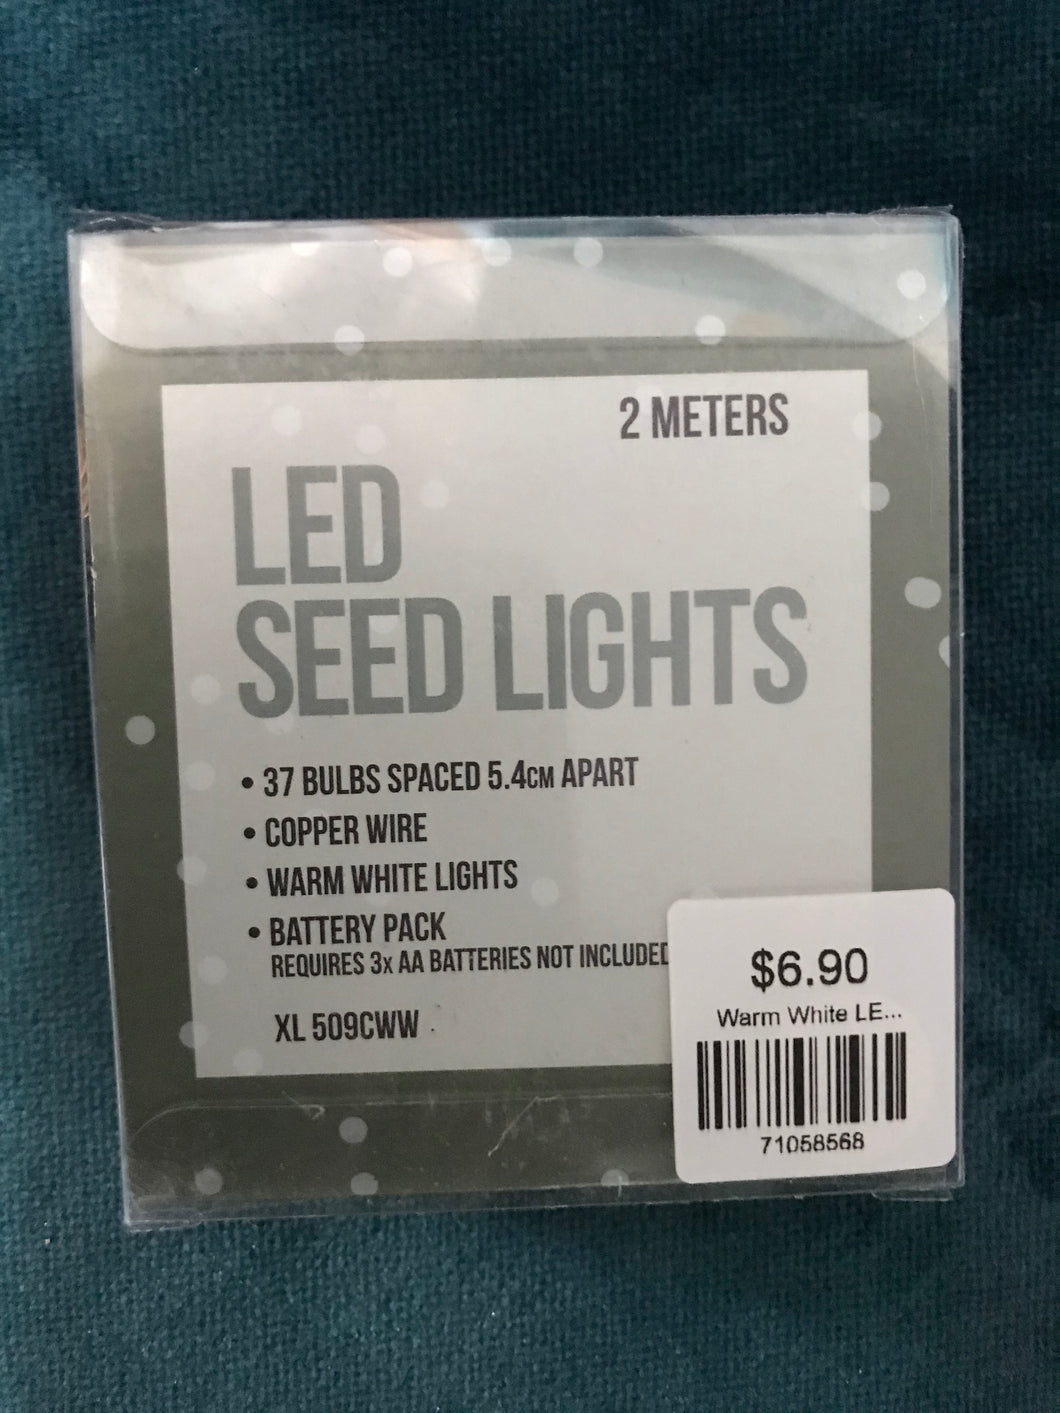 Warm White LED Seed Lights - 2 meters